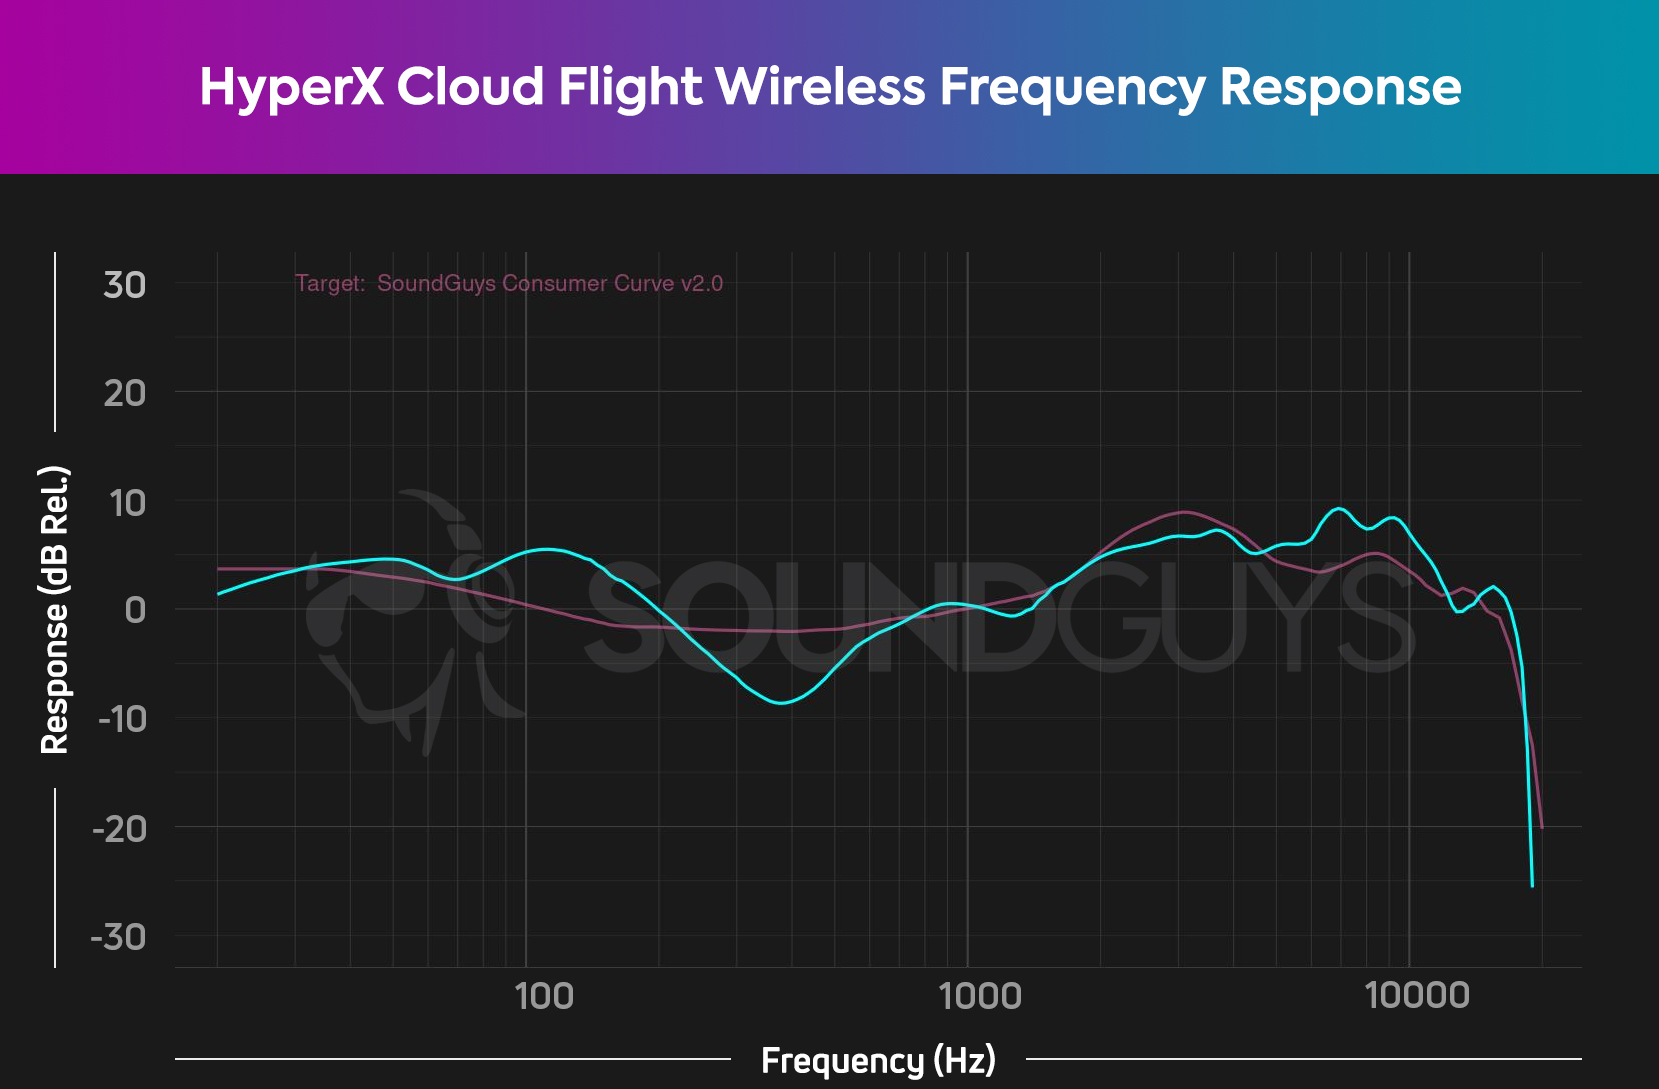 A frequency response chart for the HyperX Cloud Flight Wireless, which shows a boost in bass response